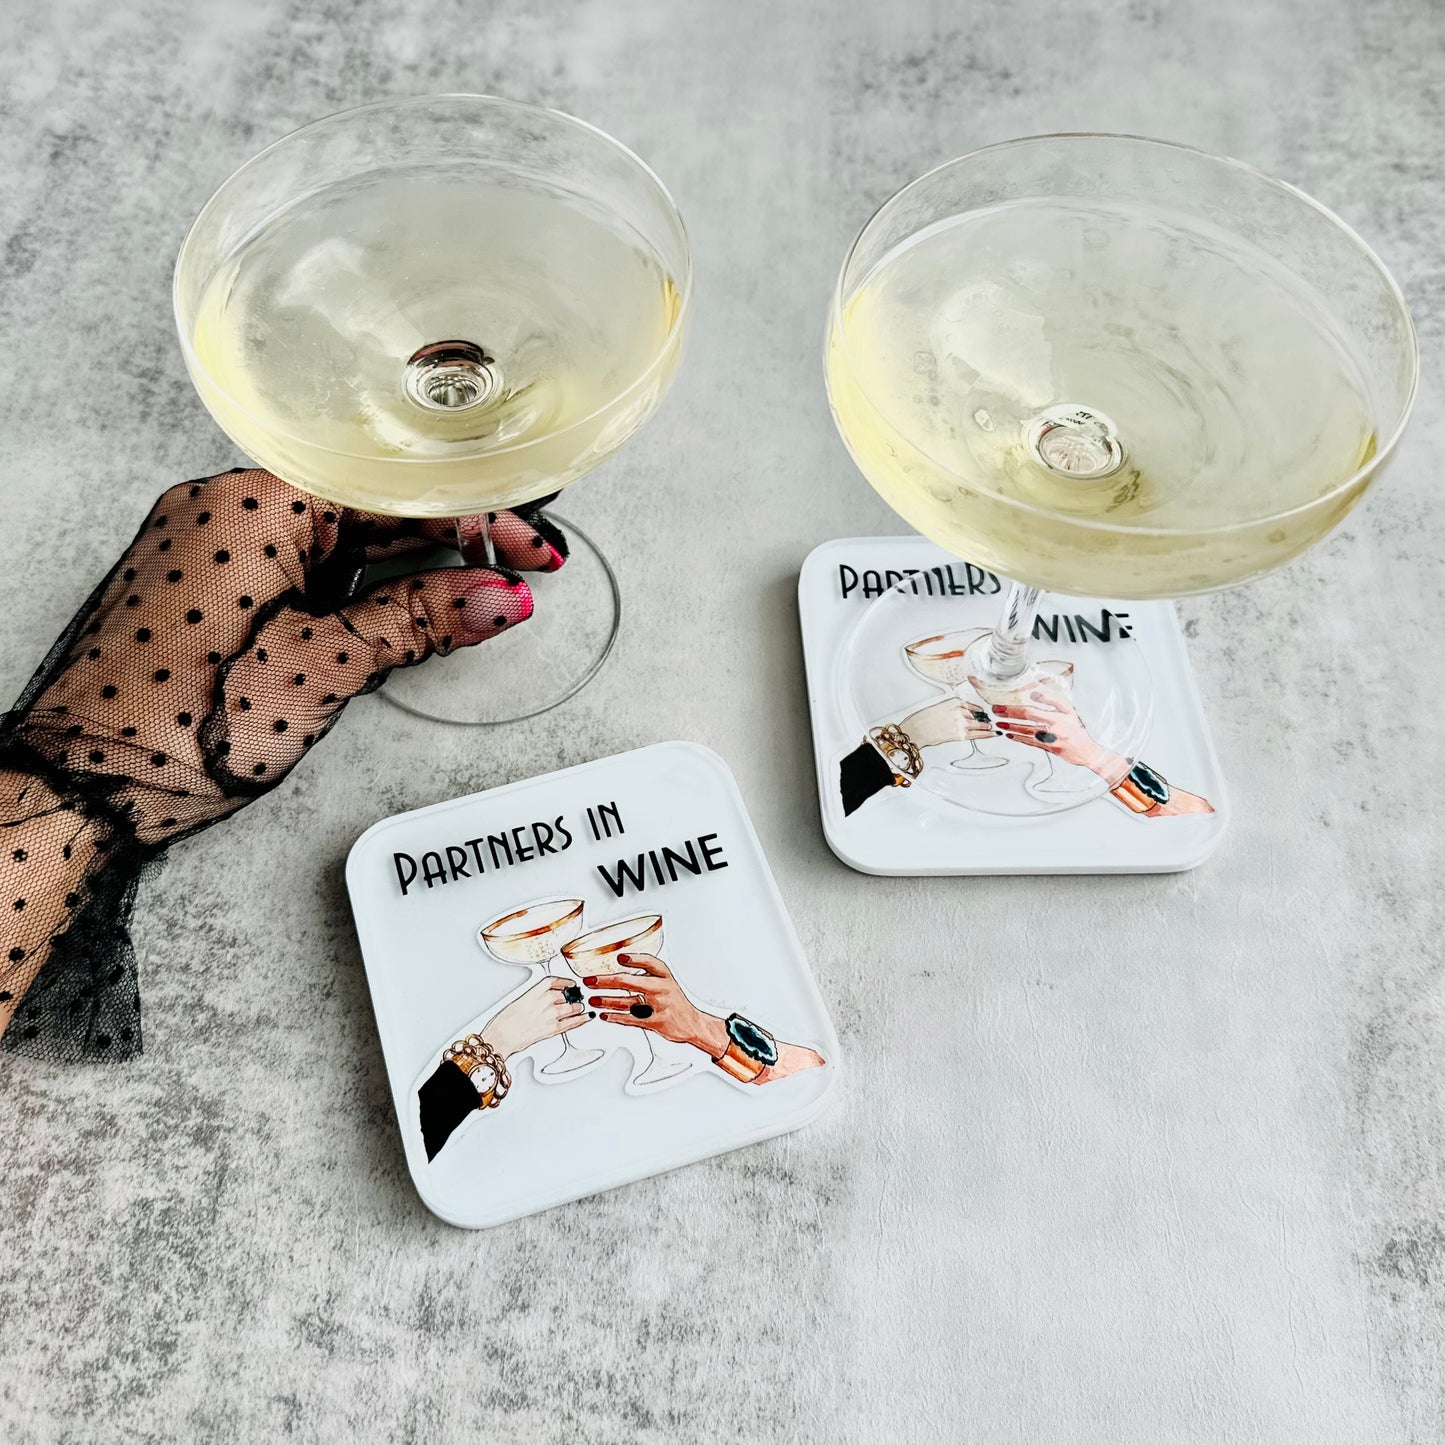 Partners In Wine | Set of 2 Coasters